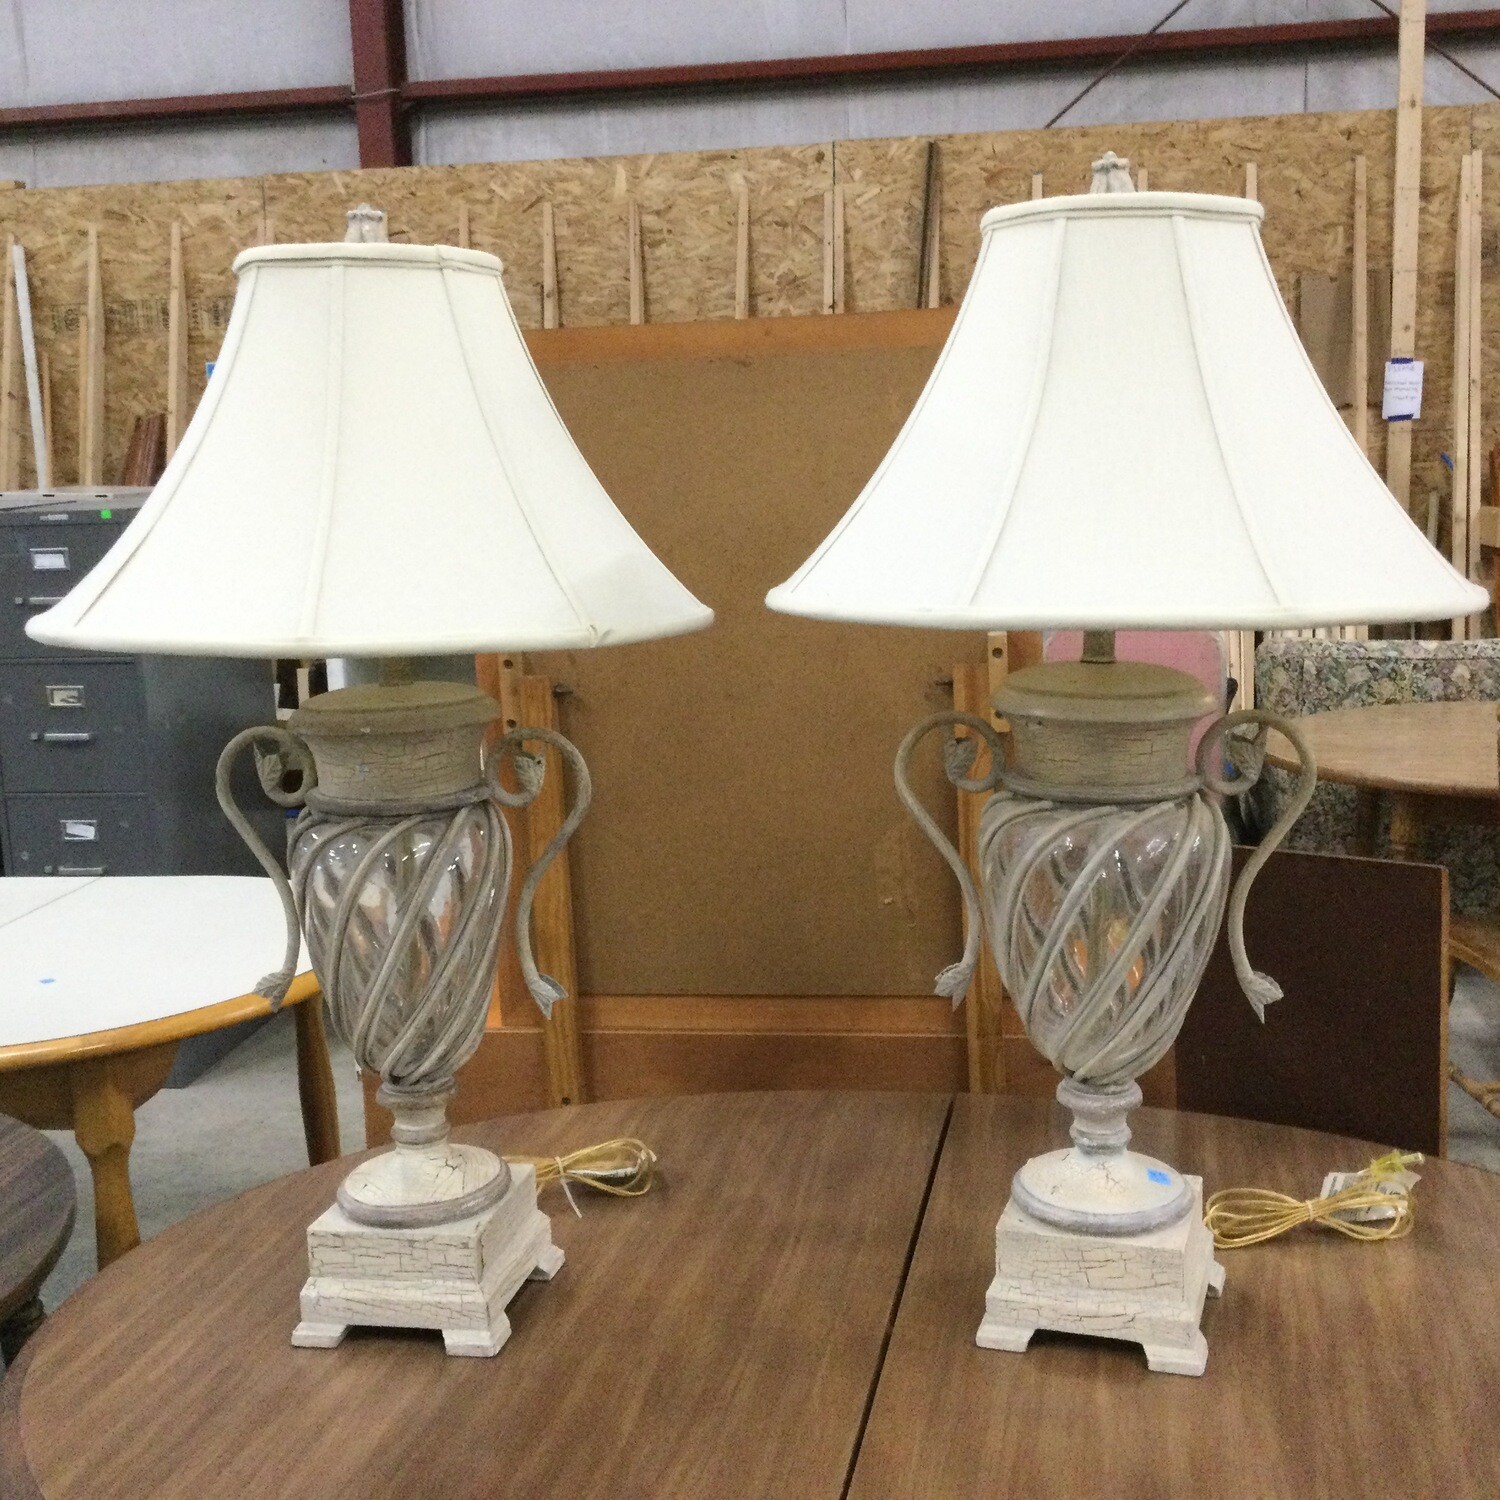 Pair of Decorative Table Lamps